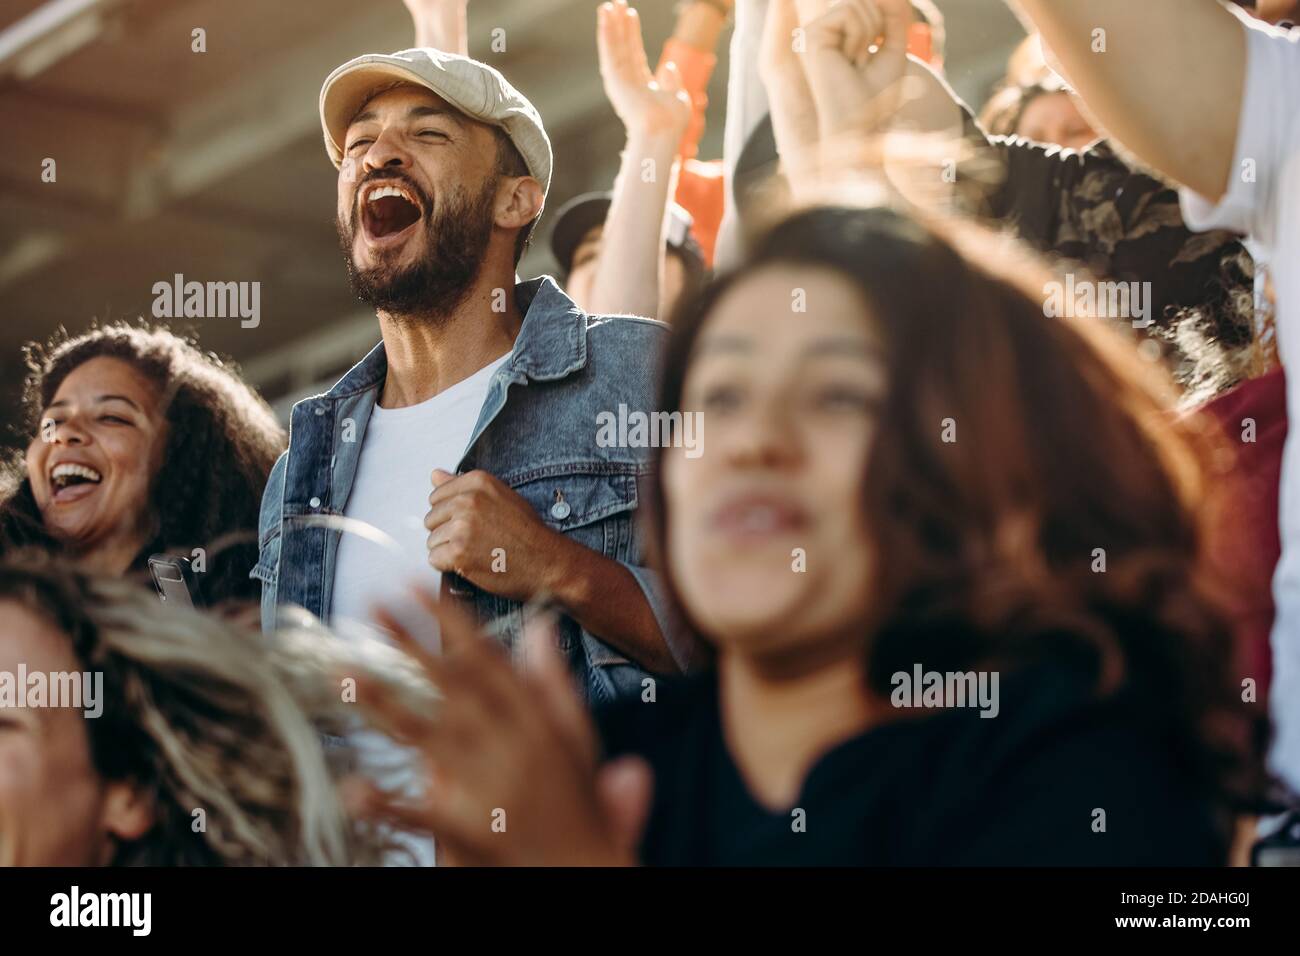 Group of happy fans cheering for their team victory. Friends having fun while watching a match at stadium. Stock Photo